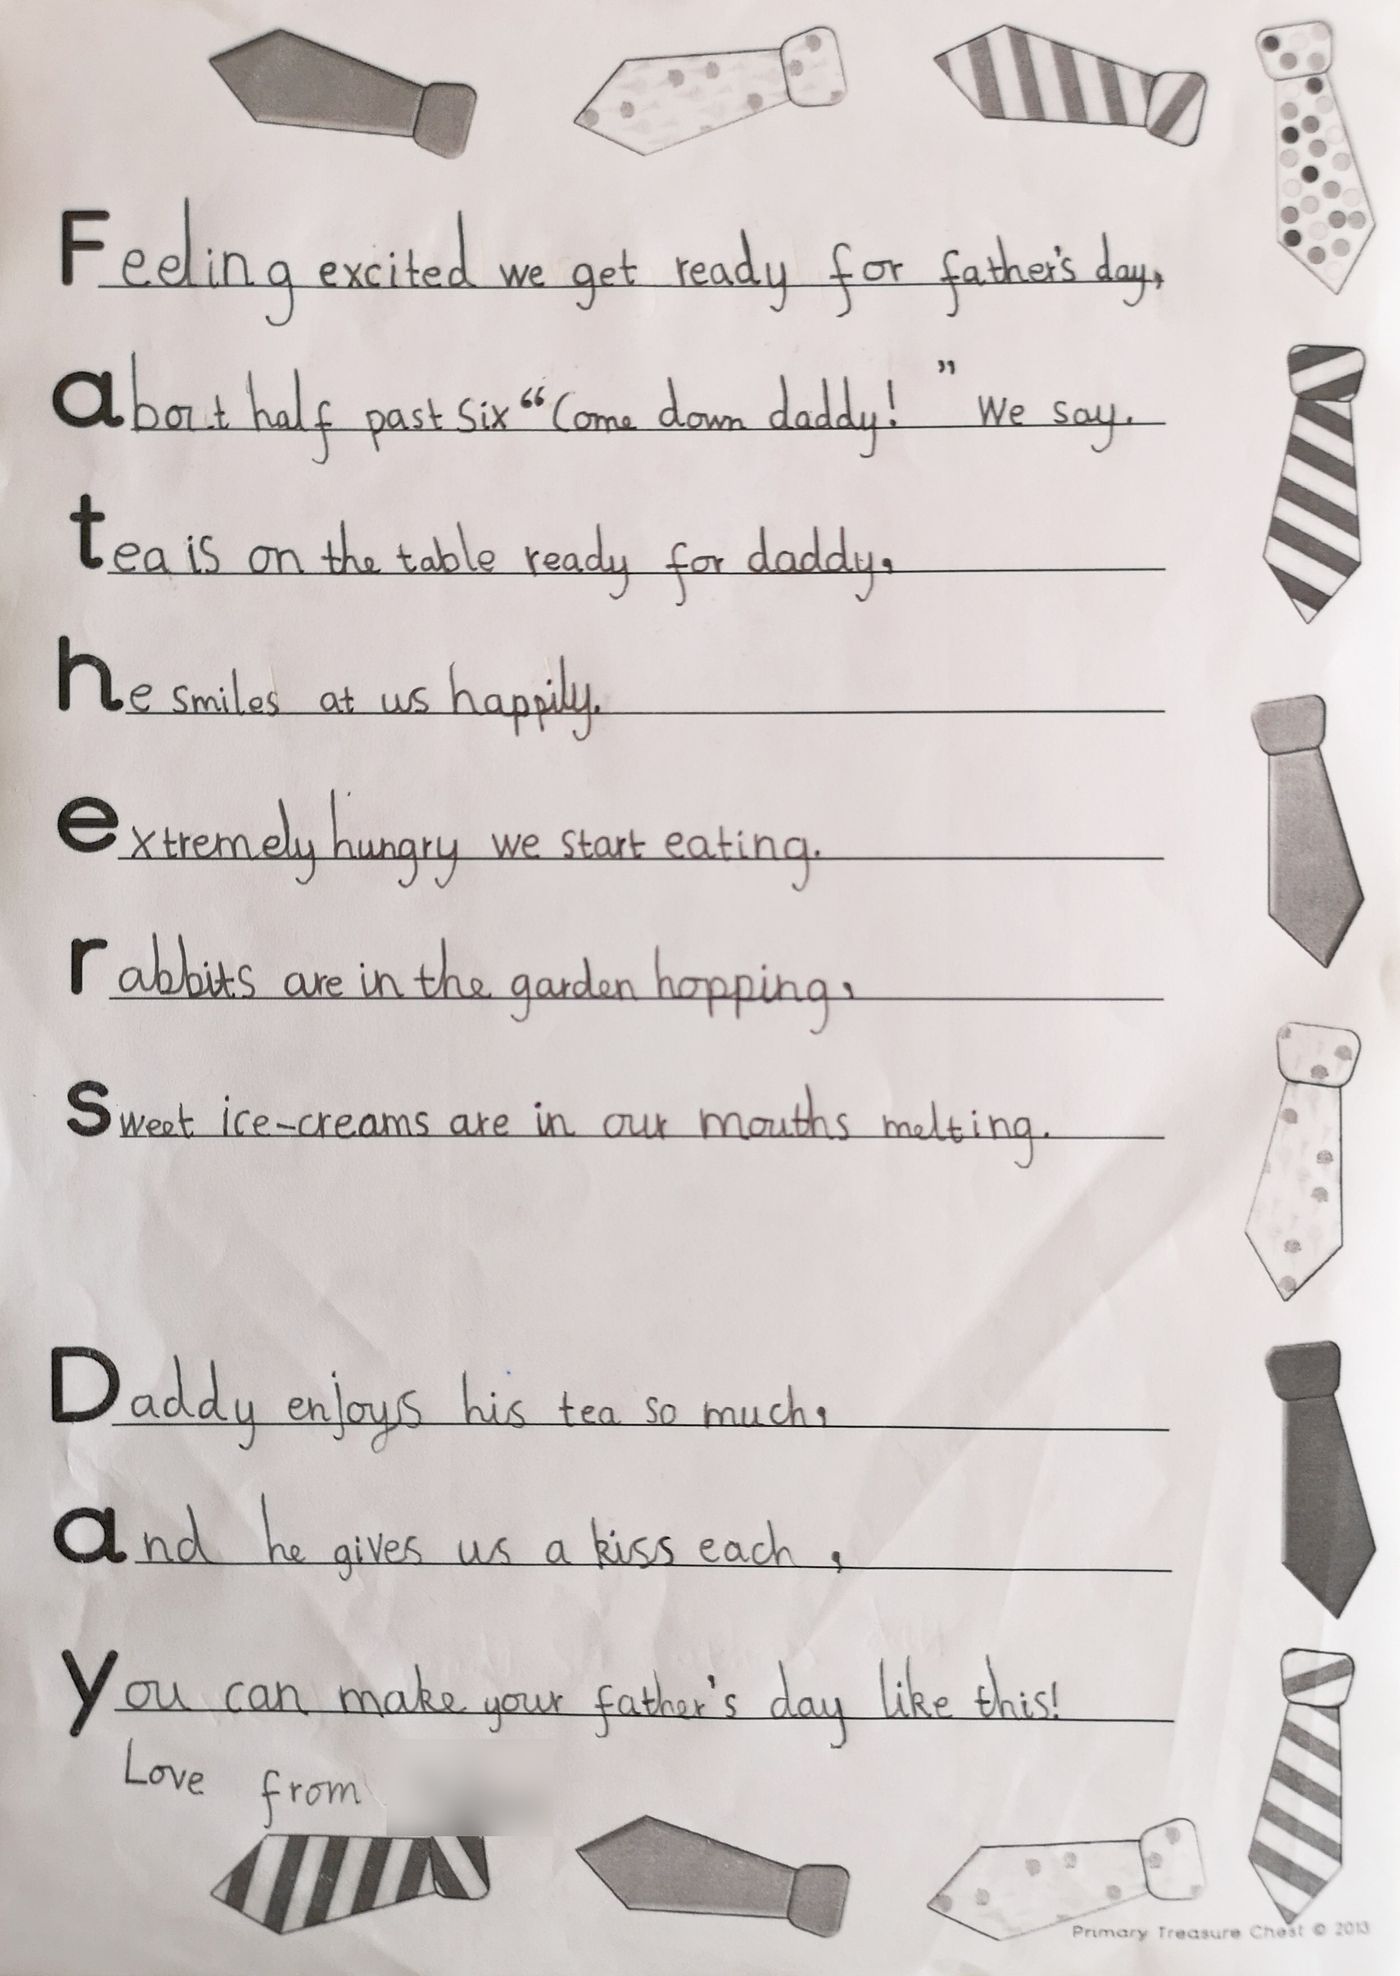 Father's day: acrostic poem. - Sophie (@sophief)